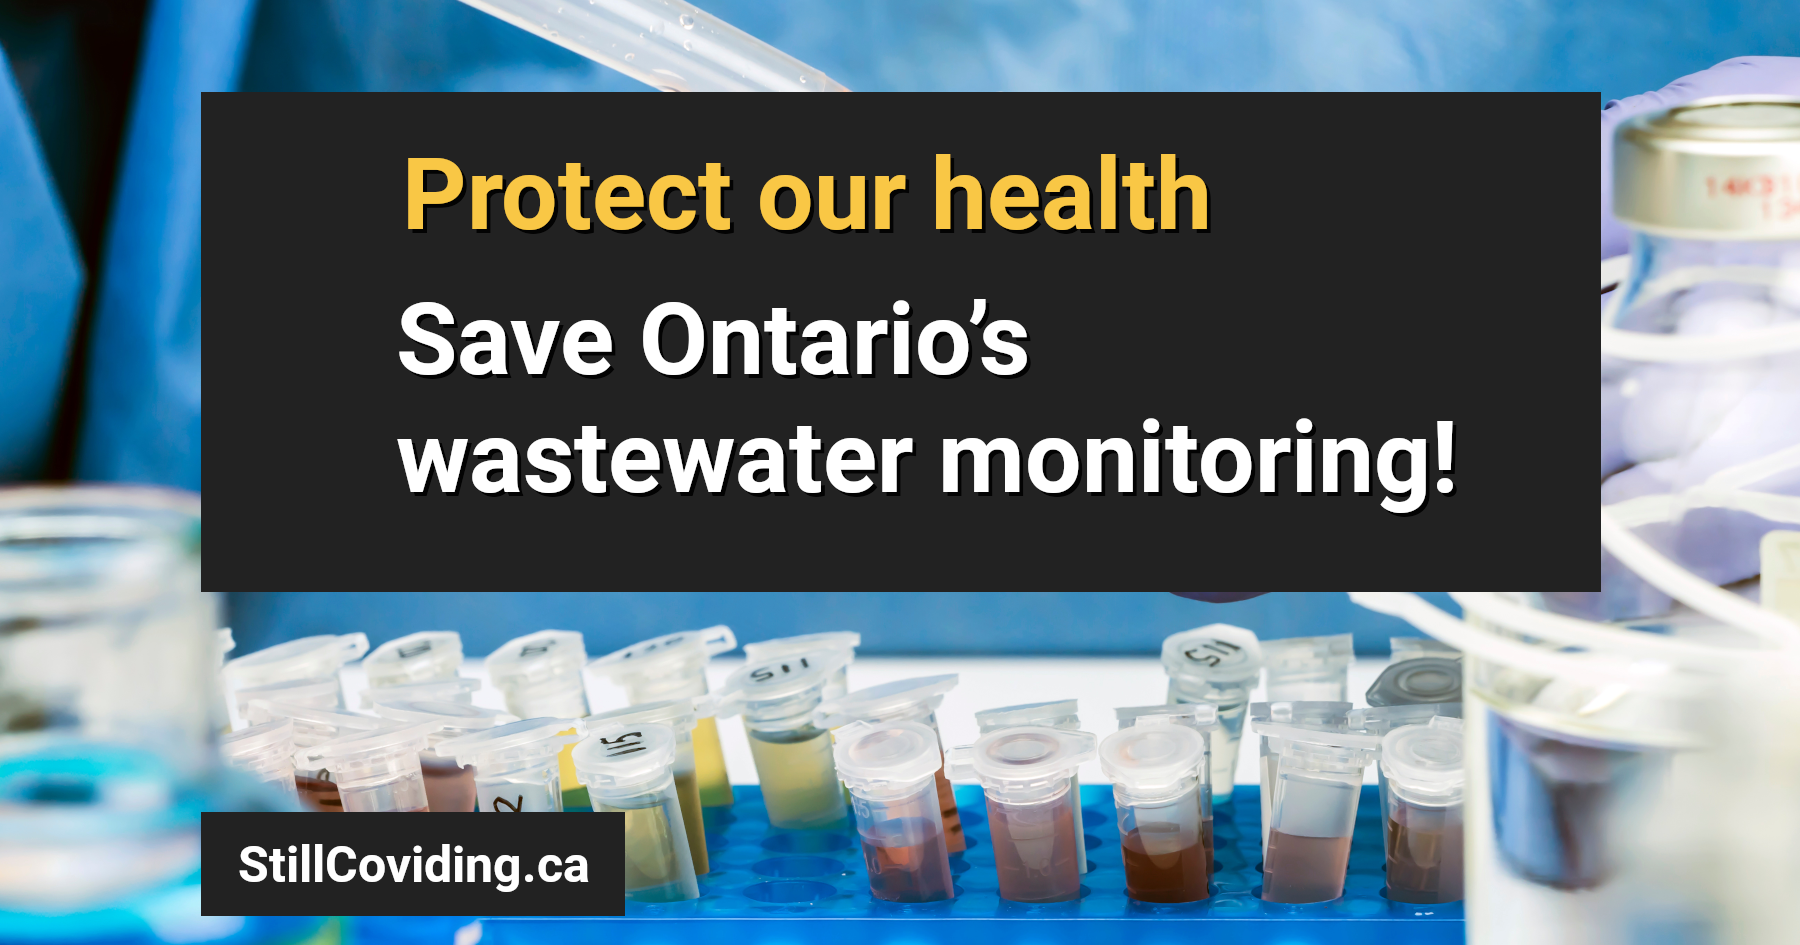 Photo of some test tubes and equipment in a lab, with text: Protect our health. Save Ontario’s wastewater monitoring. StillCoviding.ca.